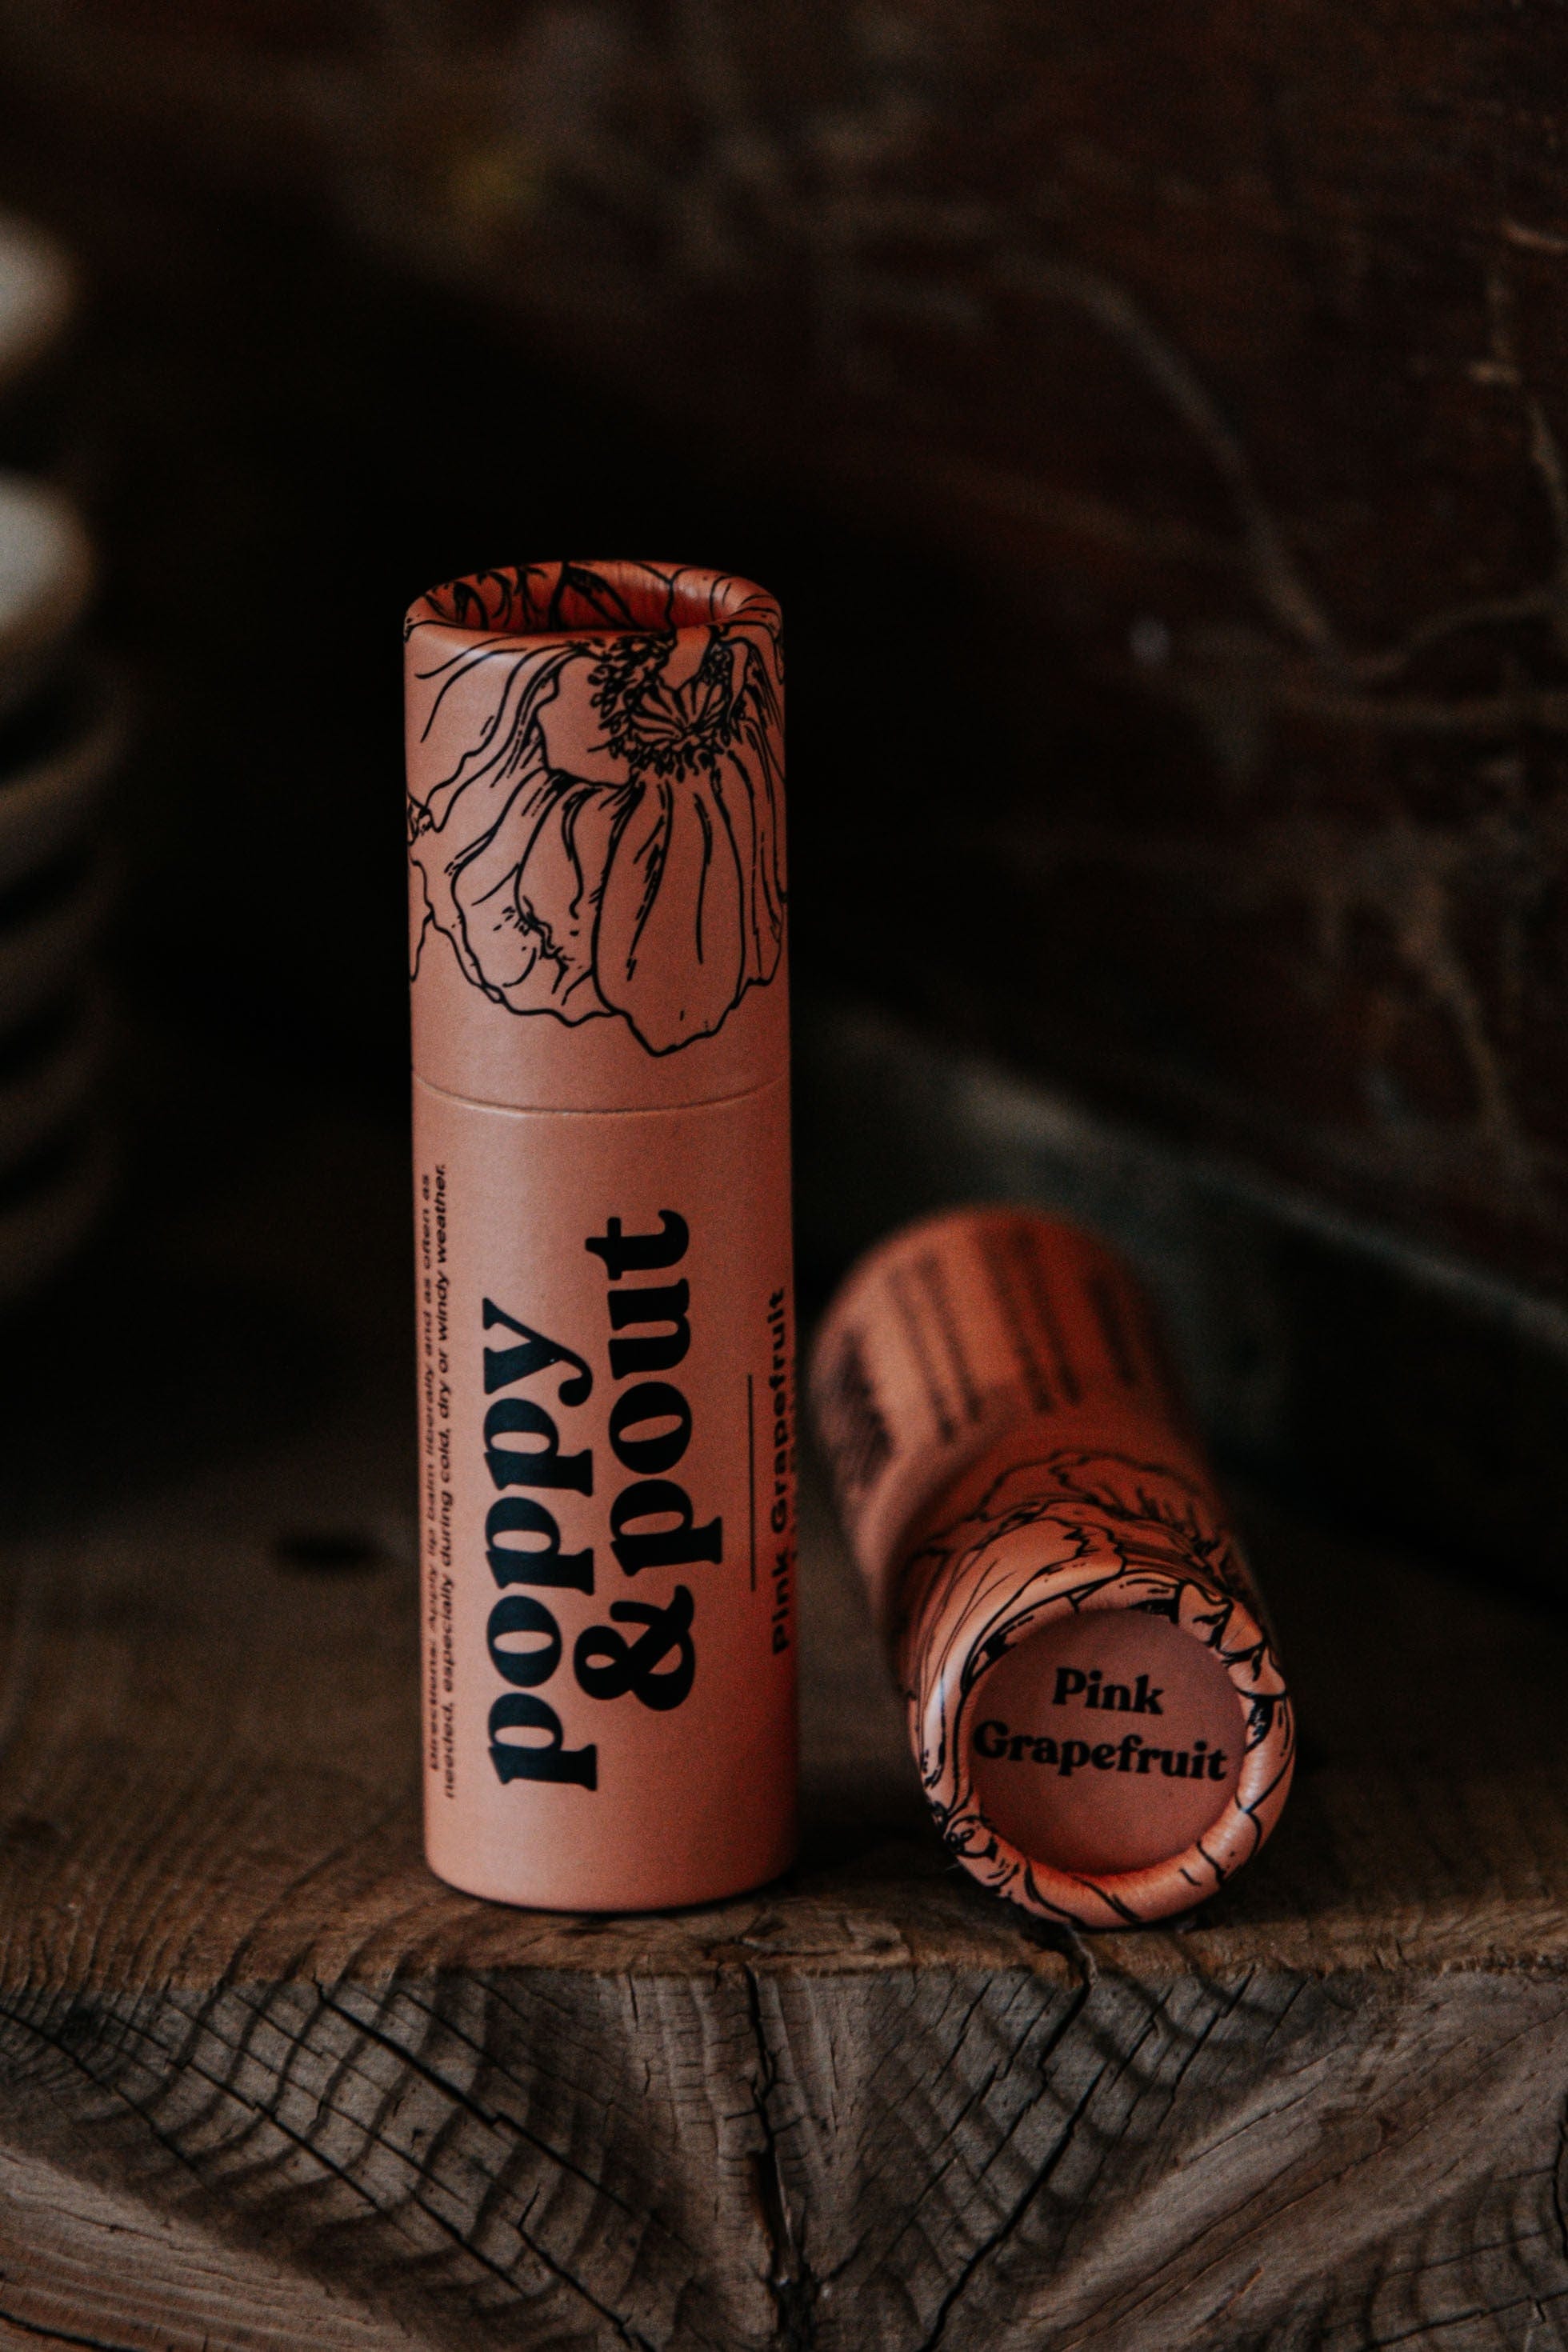 Poppy and Pout Personal Care Lip Balm, Pink Grapefruit